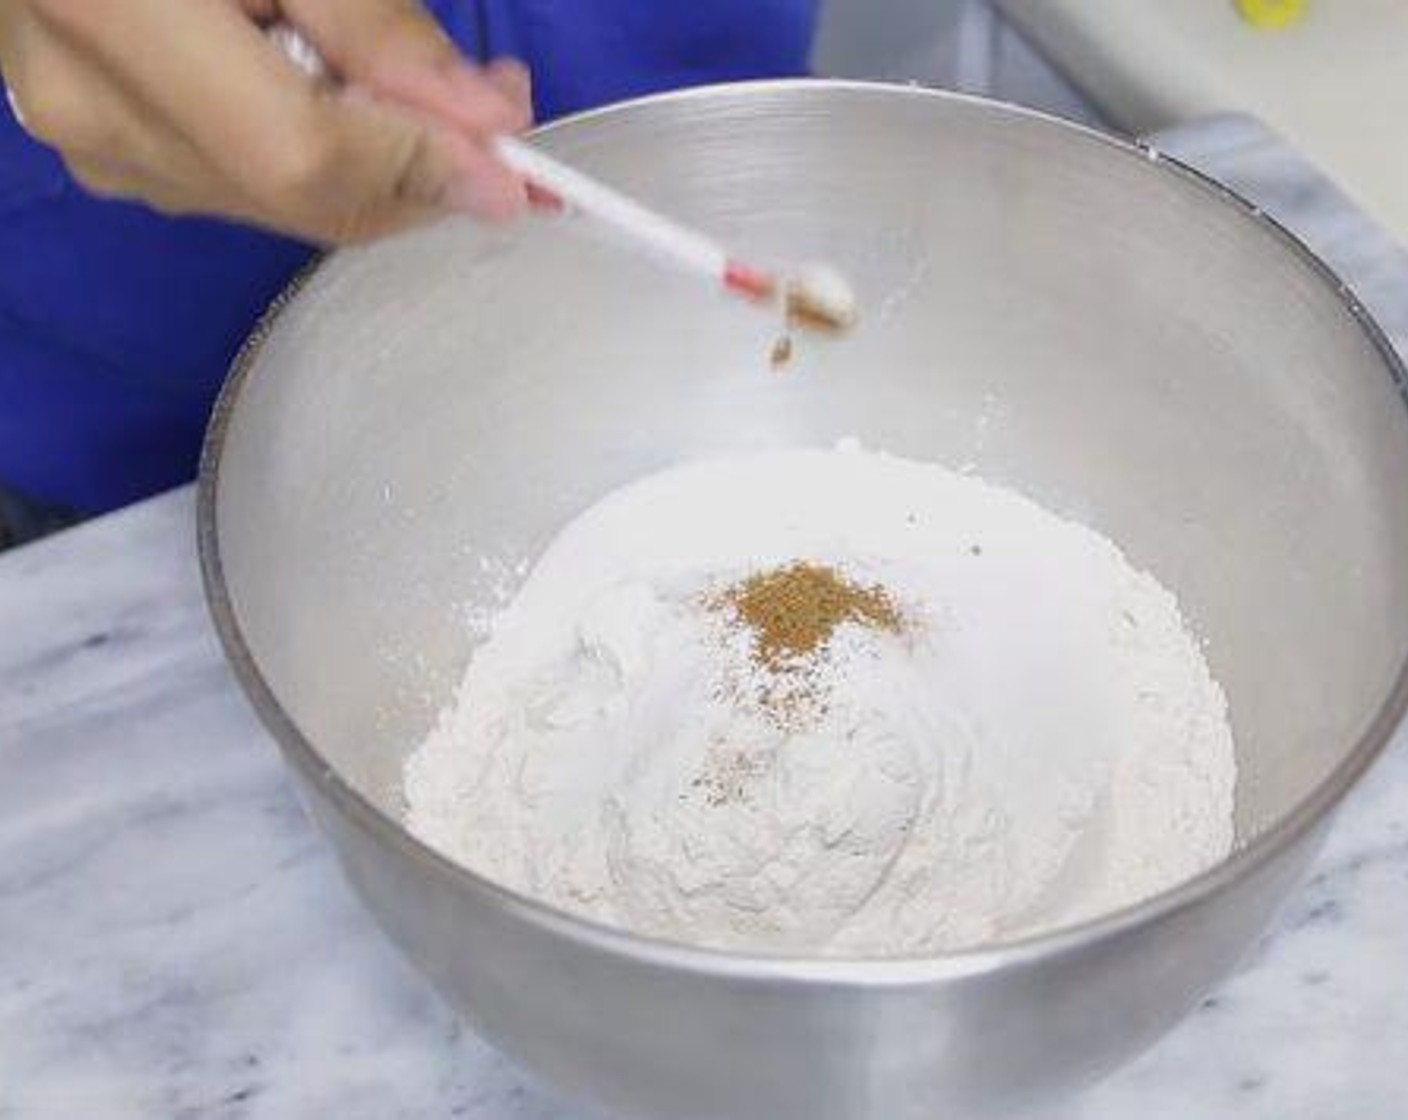 step 2 In the bowl of a standing mixer fitted with a hook attachment, stir together All-Purpose Flour (3 1/2 cups), Caster Sugar (1/3 cup), Salt (1 tsp) and Ground Nutmeg (1/4 tsp).